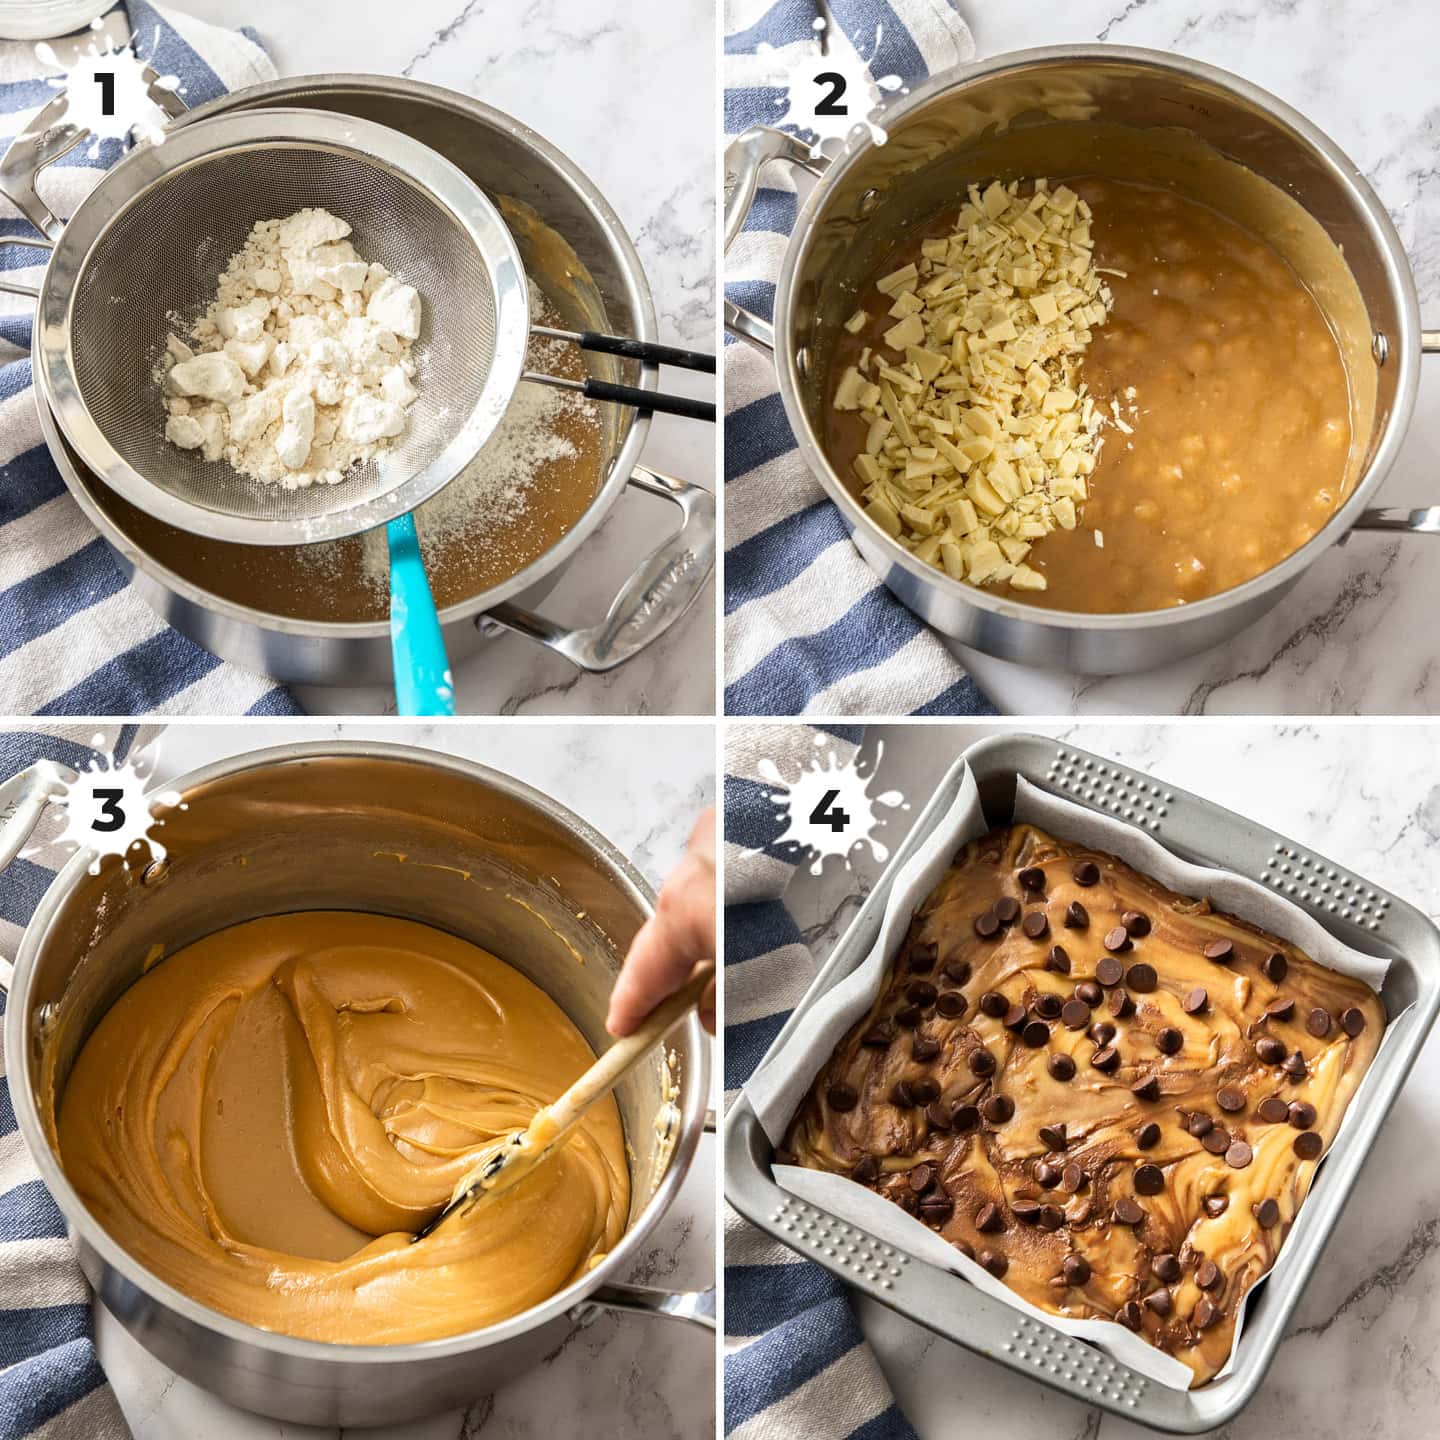 A saucepan in various images showing the process of making fudge